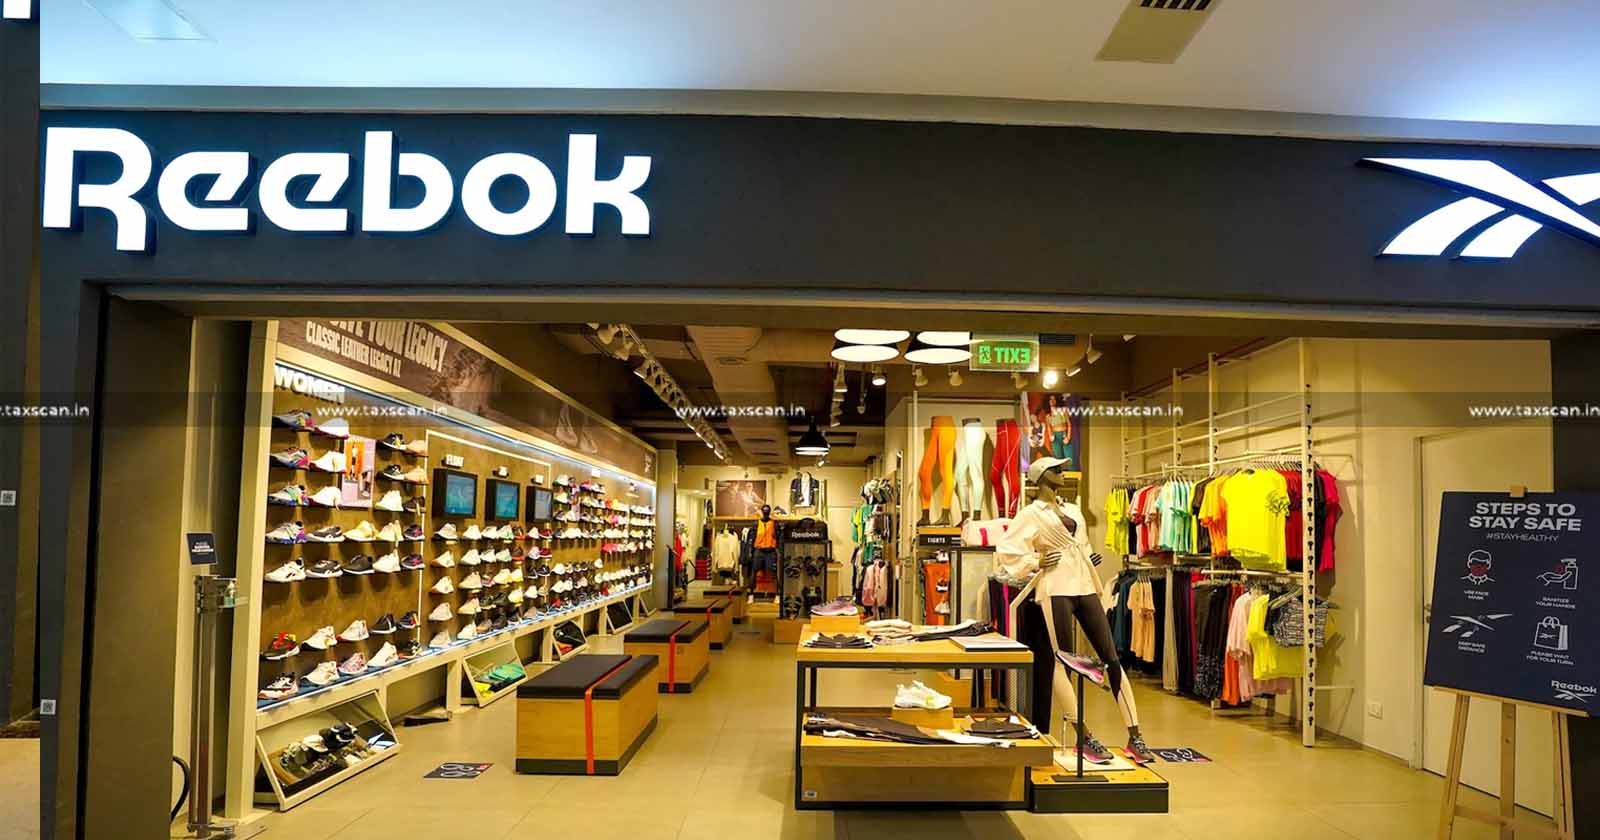 Relief to Reebok India - CESTAT rules - IPR - Reebok India - taxscan